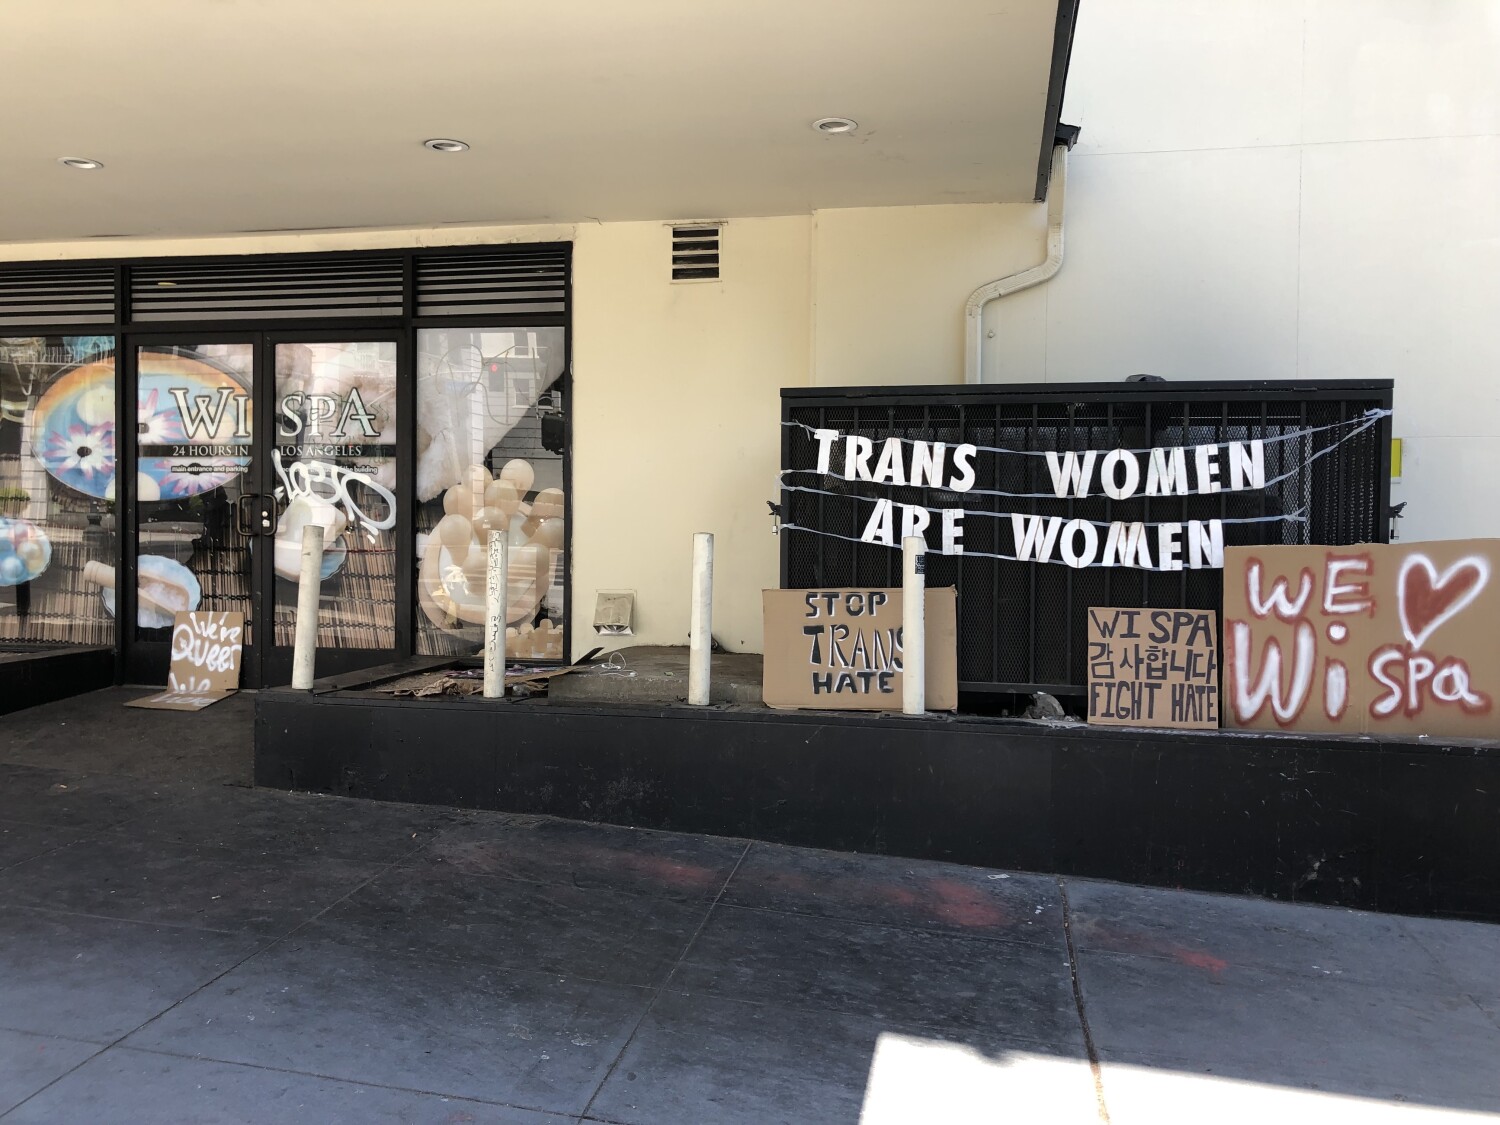 Dueling protesters clash outside Koreatown spa over transgender rights